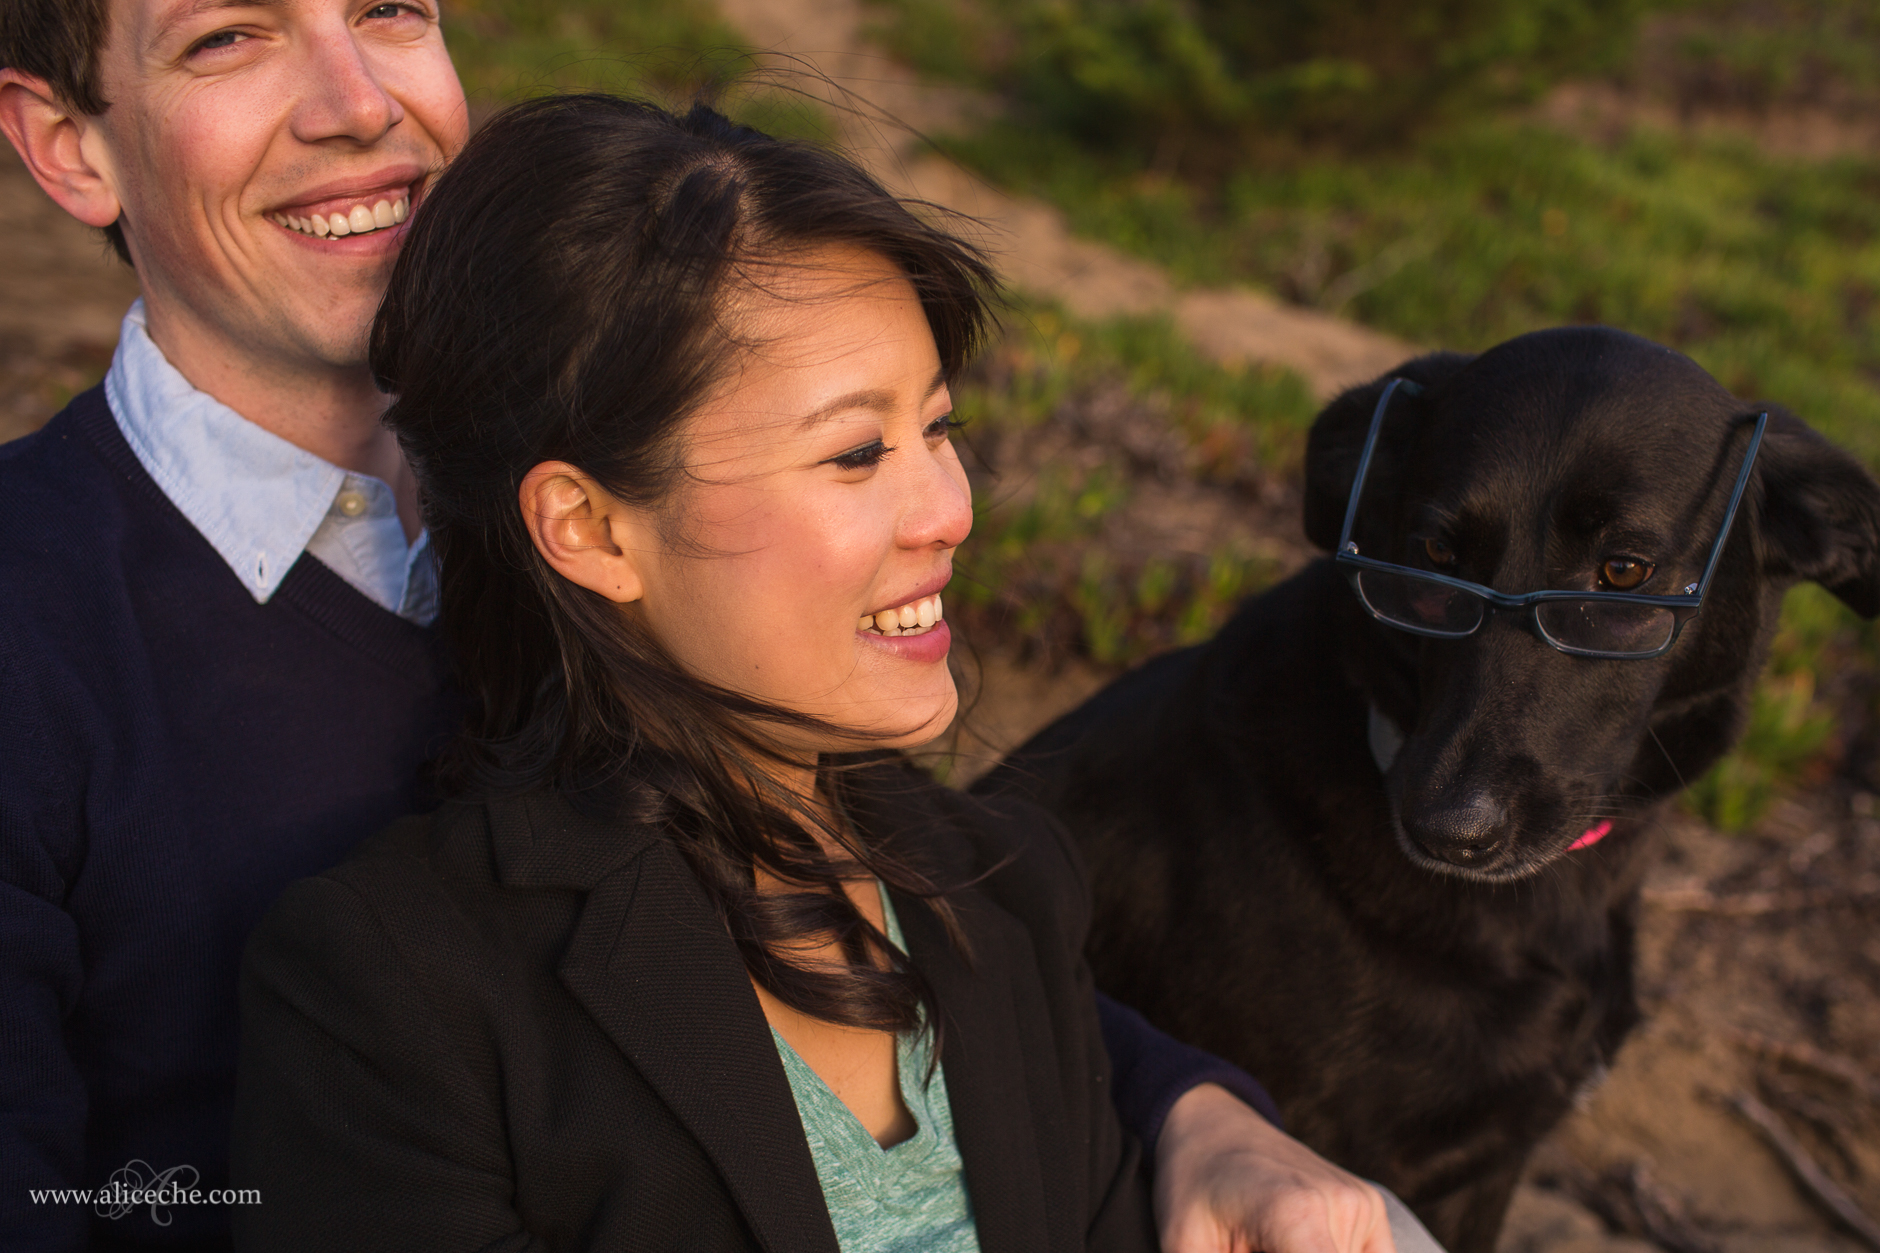 alice-che-photography-couple-on-beach-with-dog-wearing-glasses-san-francisco-engagement